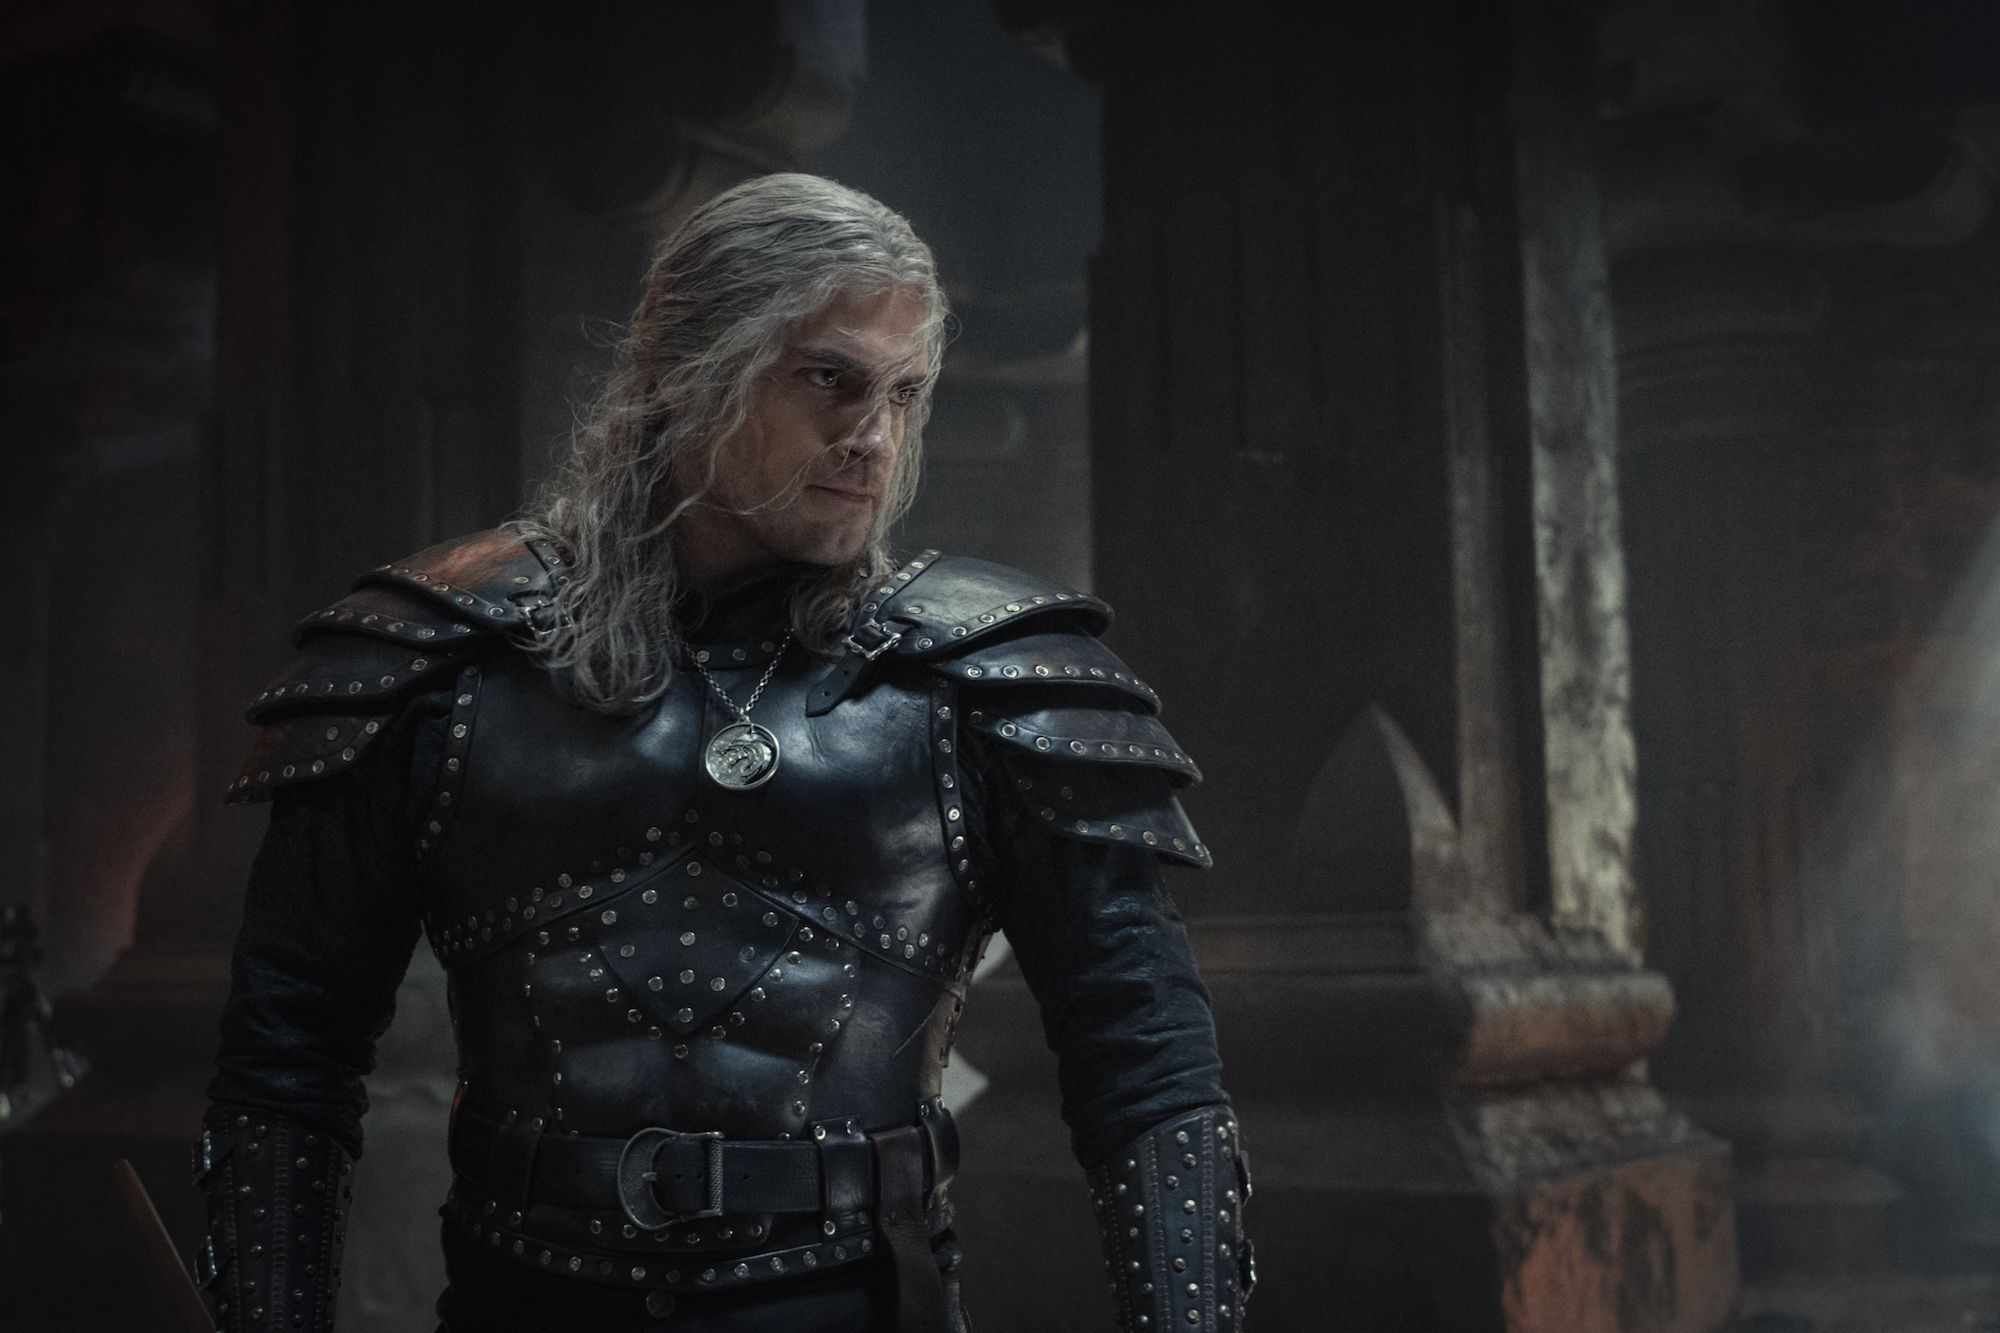 The Witcher' Part 2 Review: Henry Cavill Sent Off With a Whimper